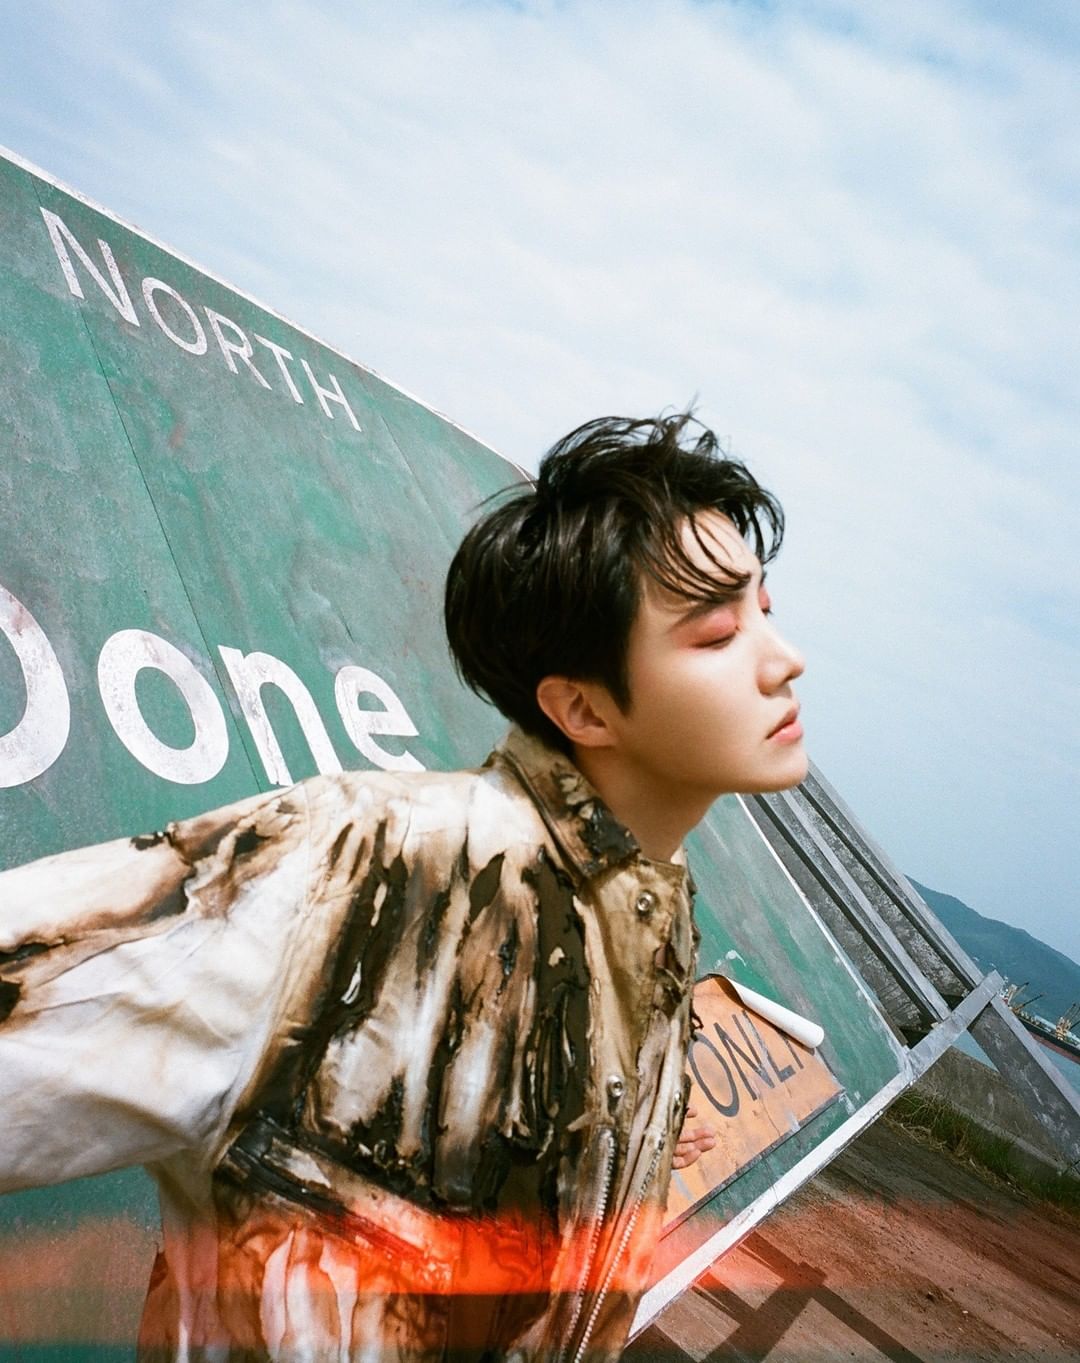 j-hope enters #82 on US Billboard's 'Hot 100' chart with solo song 'MORE'